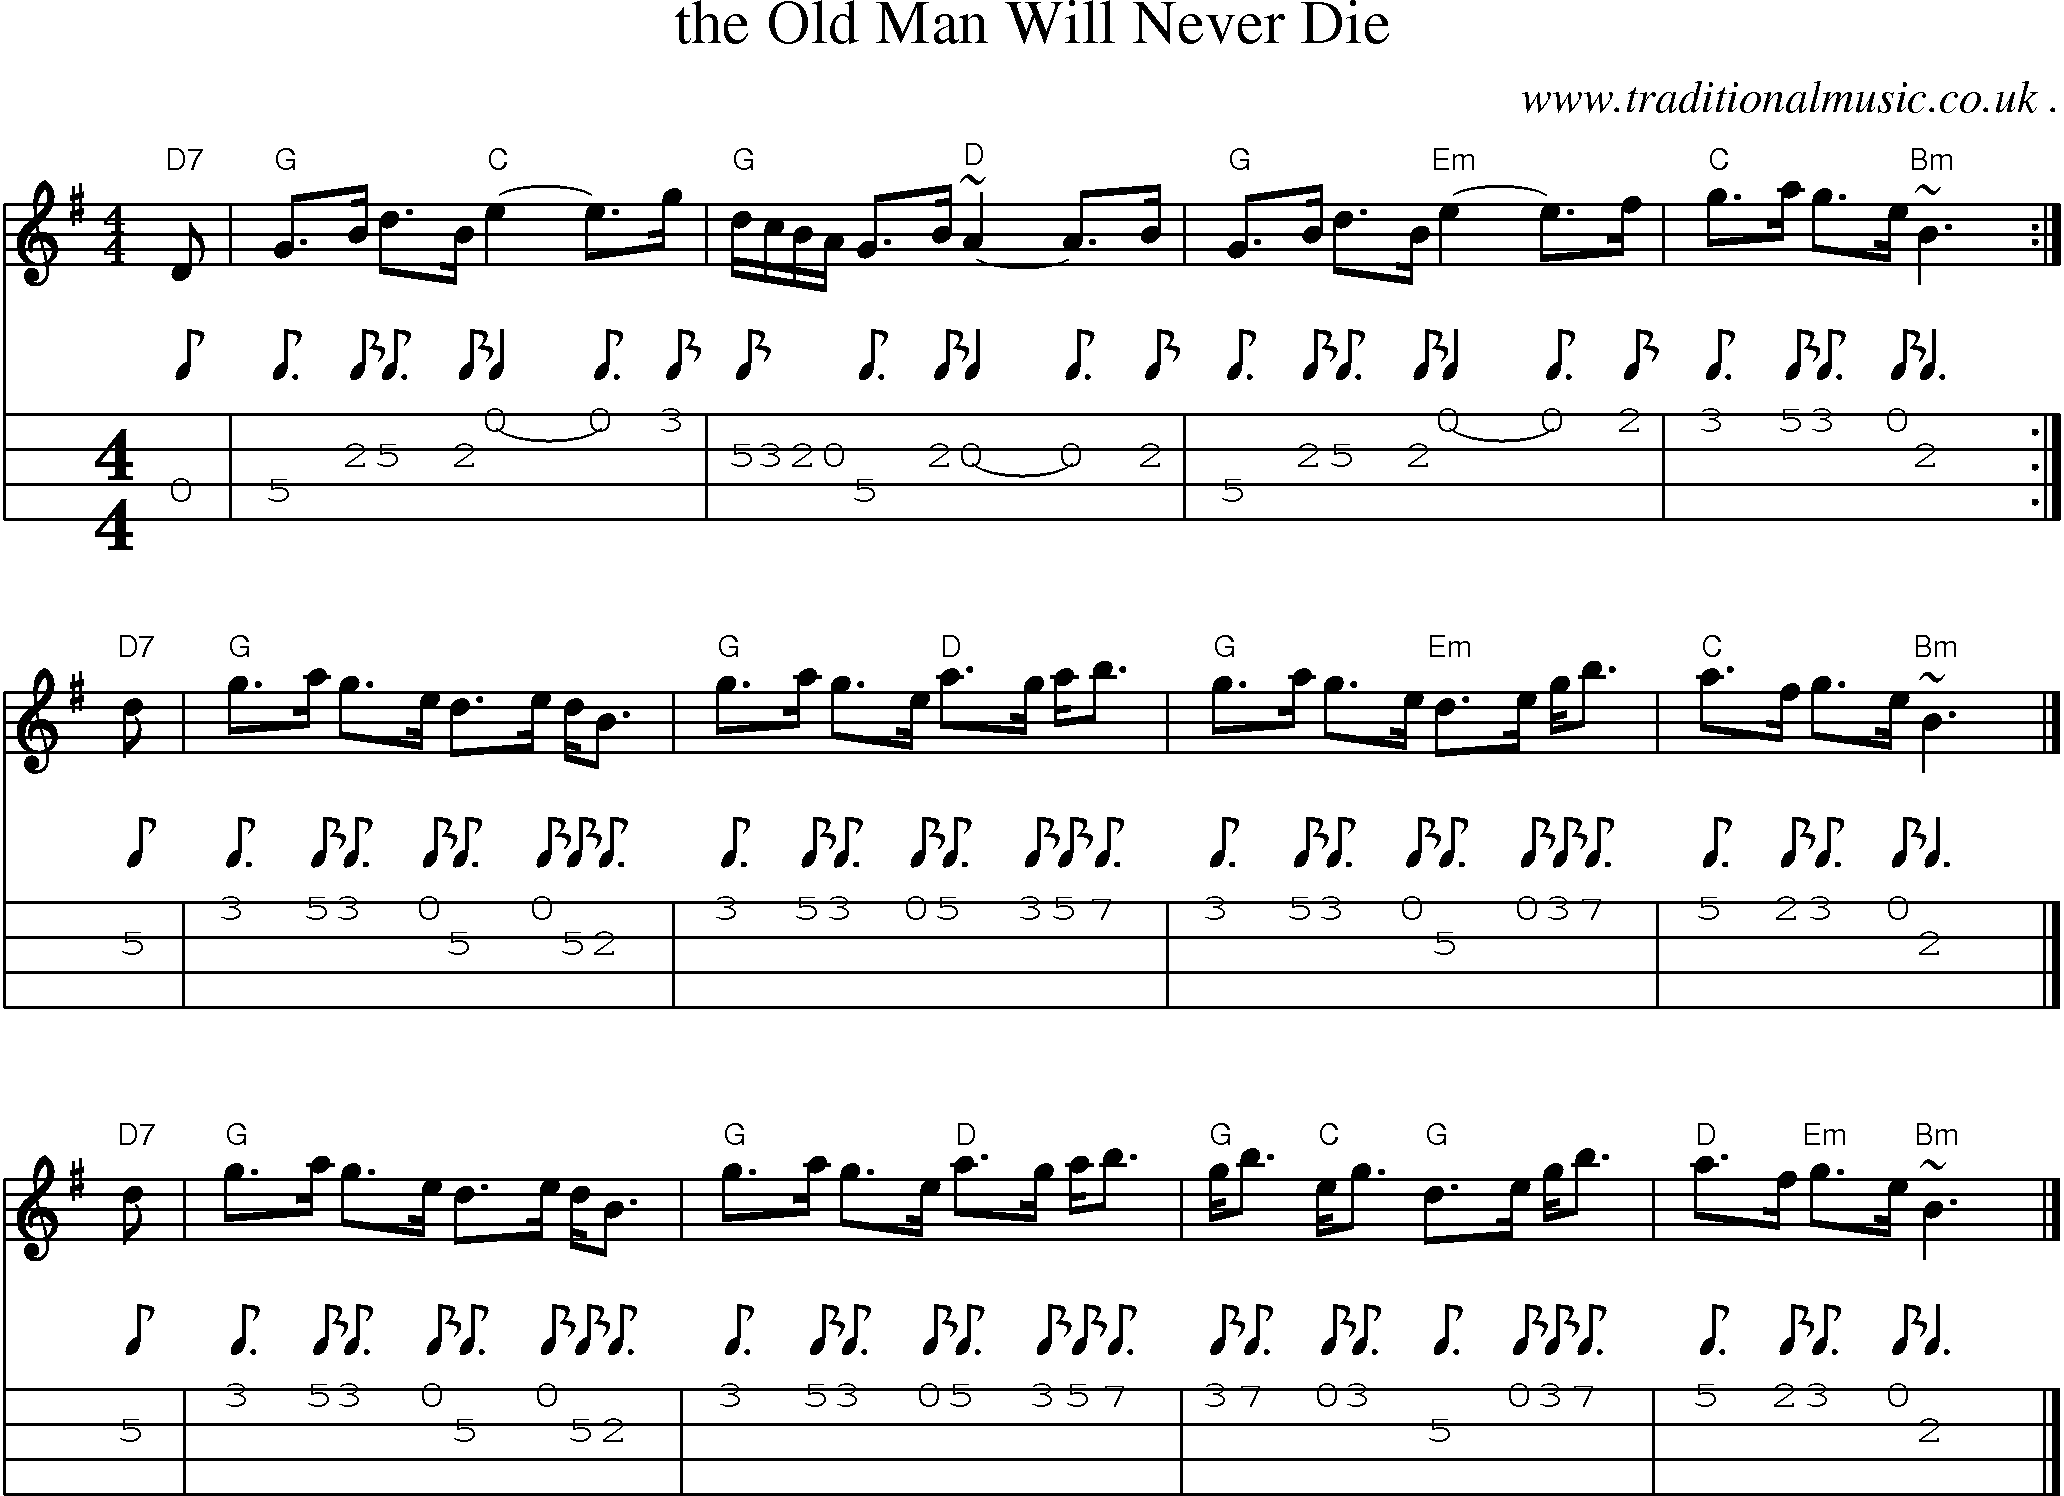 Sheet-music  score, Chords and Mandolin Tabs for The Old Man Will Never Die